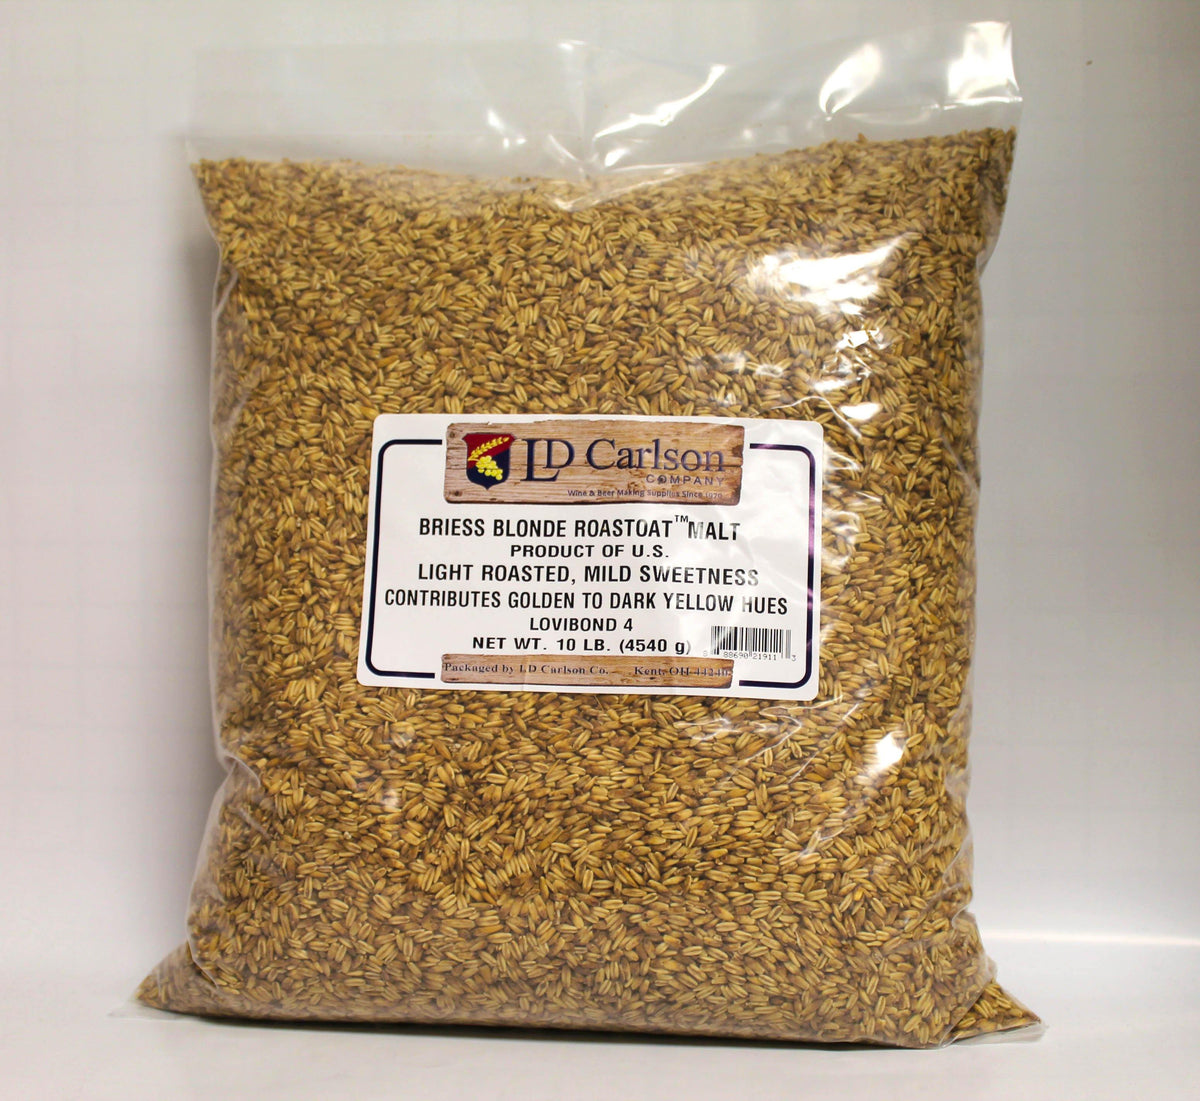 Briess Blonde Roasted Oat Malt 4L - 1911 - Delta Brewing Systems